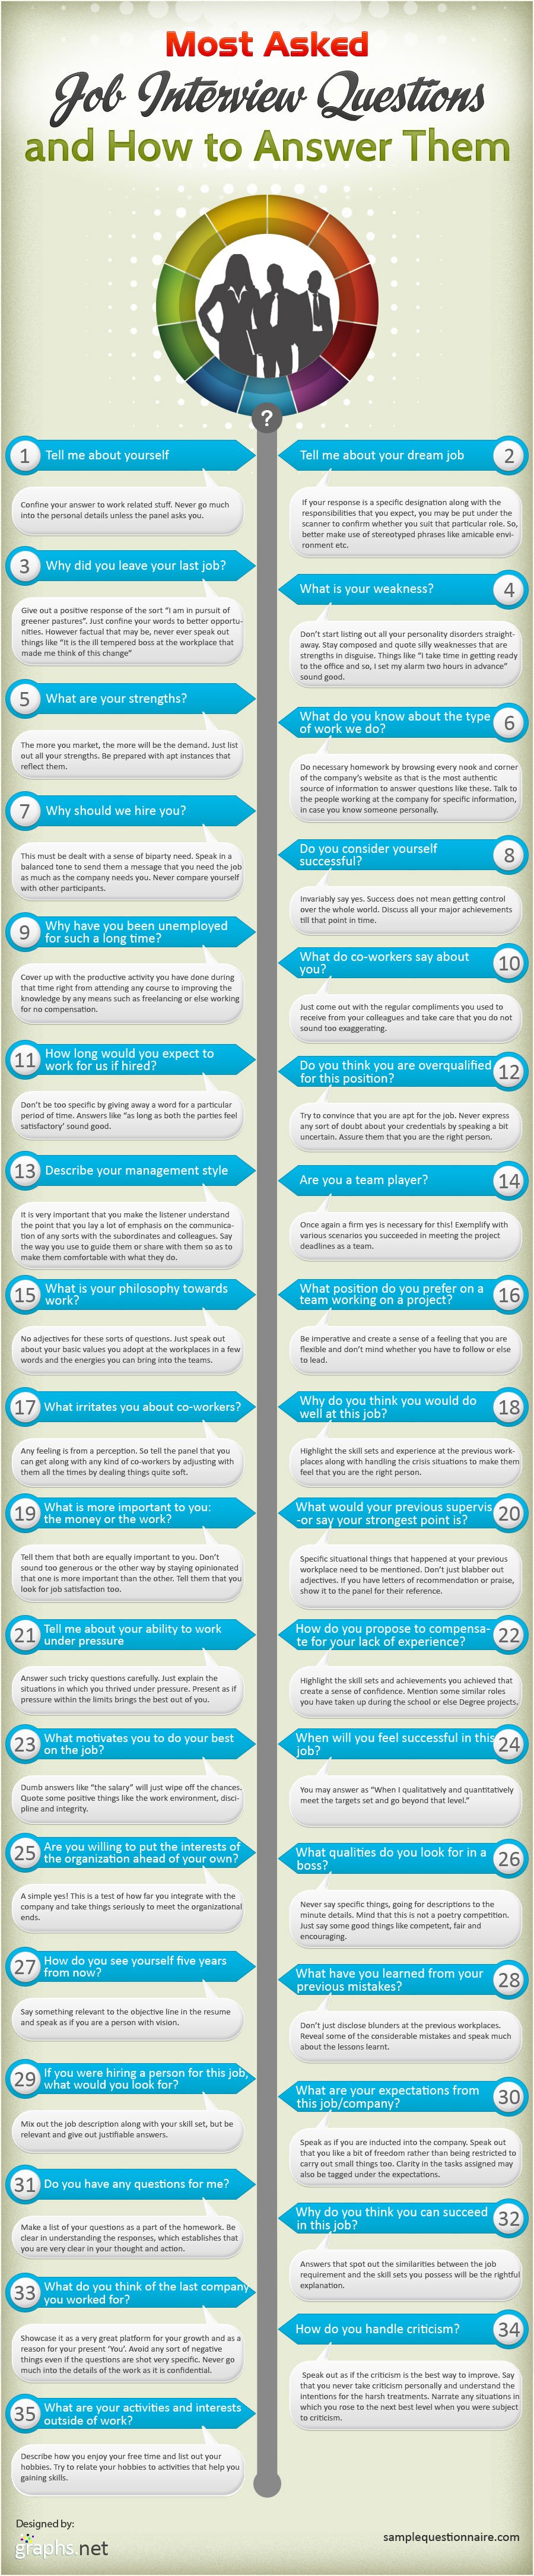 Most-Asked-Job-Interview-Questions-and-How-to-Answer-Them